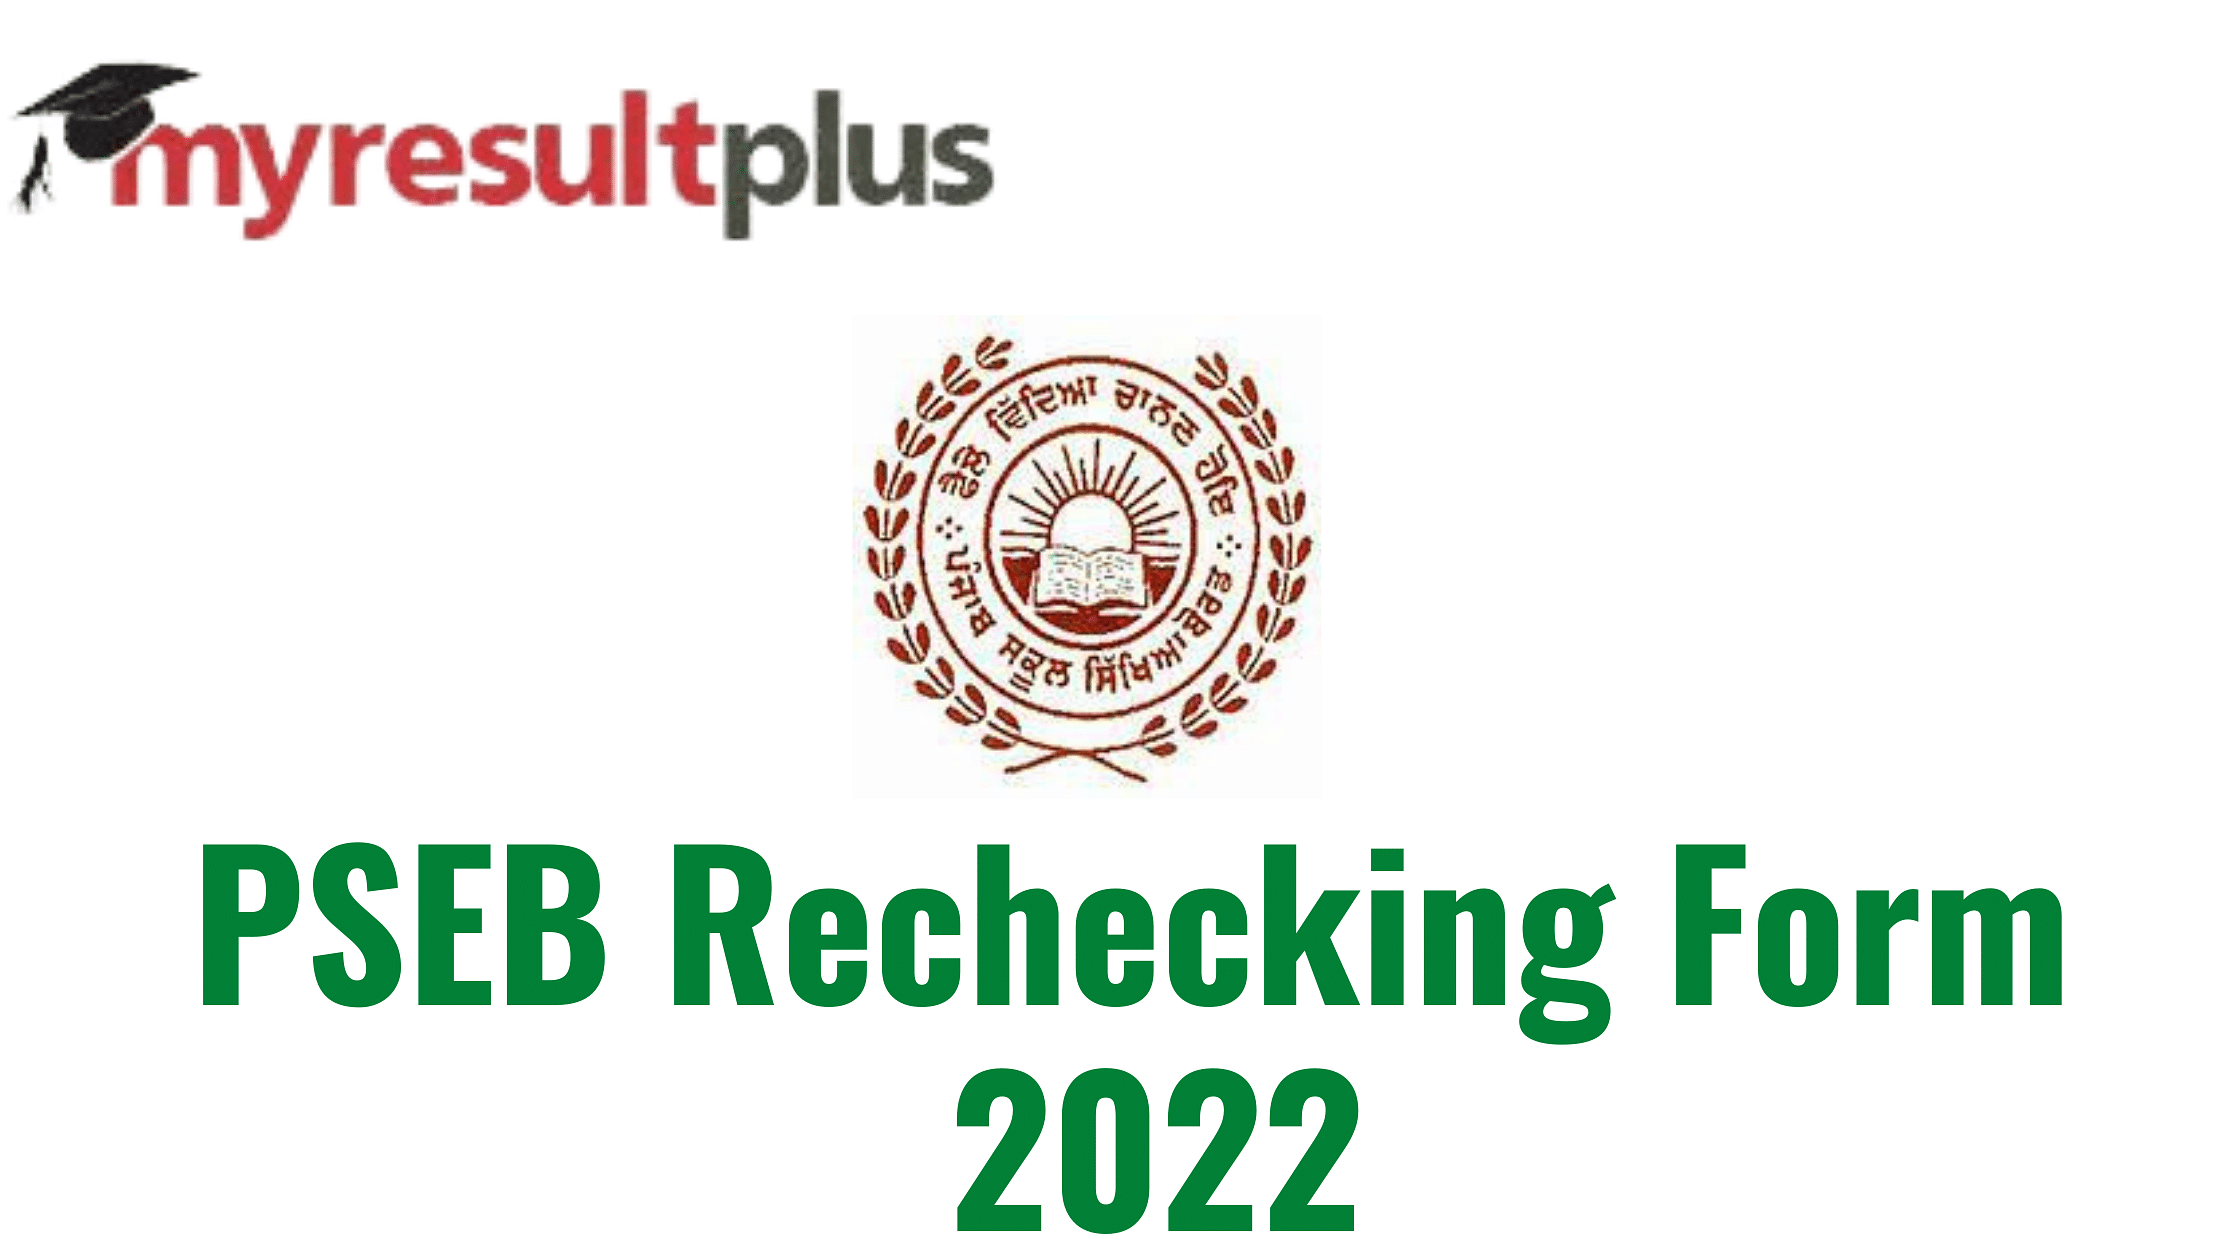 PSEB 10th Result 2022: Revaluation Process to Commence Tomorrow, Know How to Apply Here